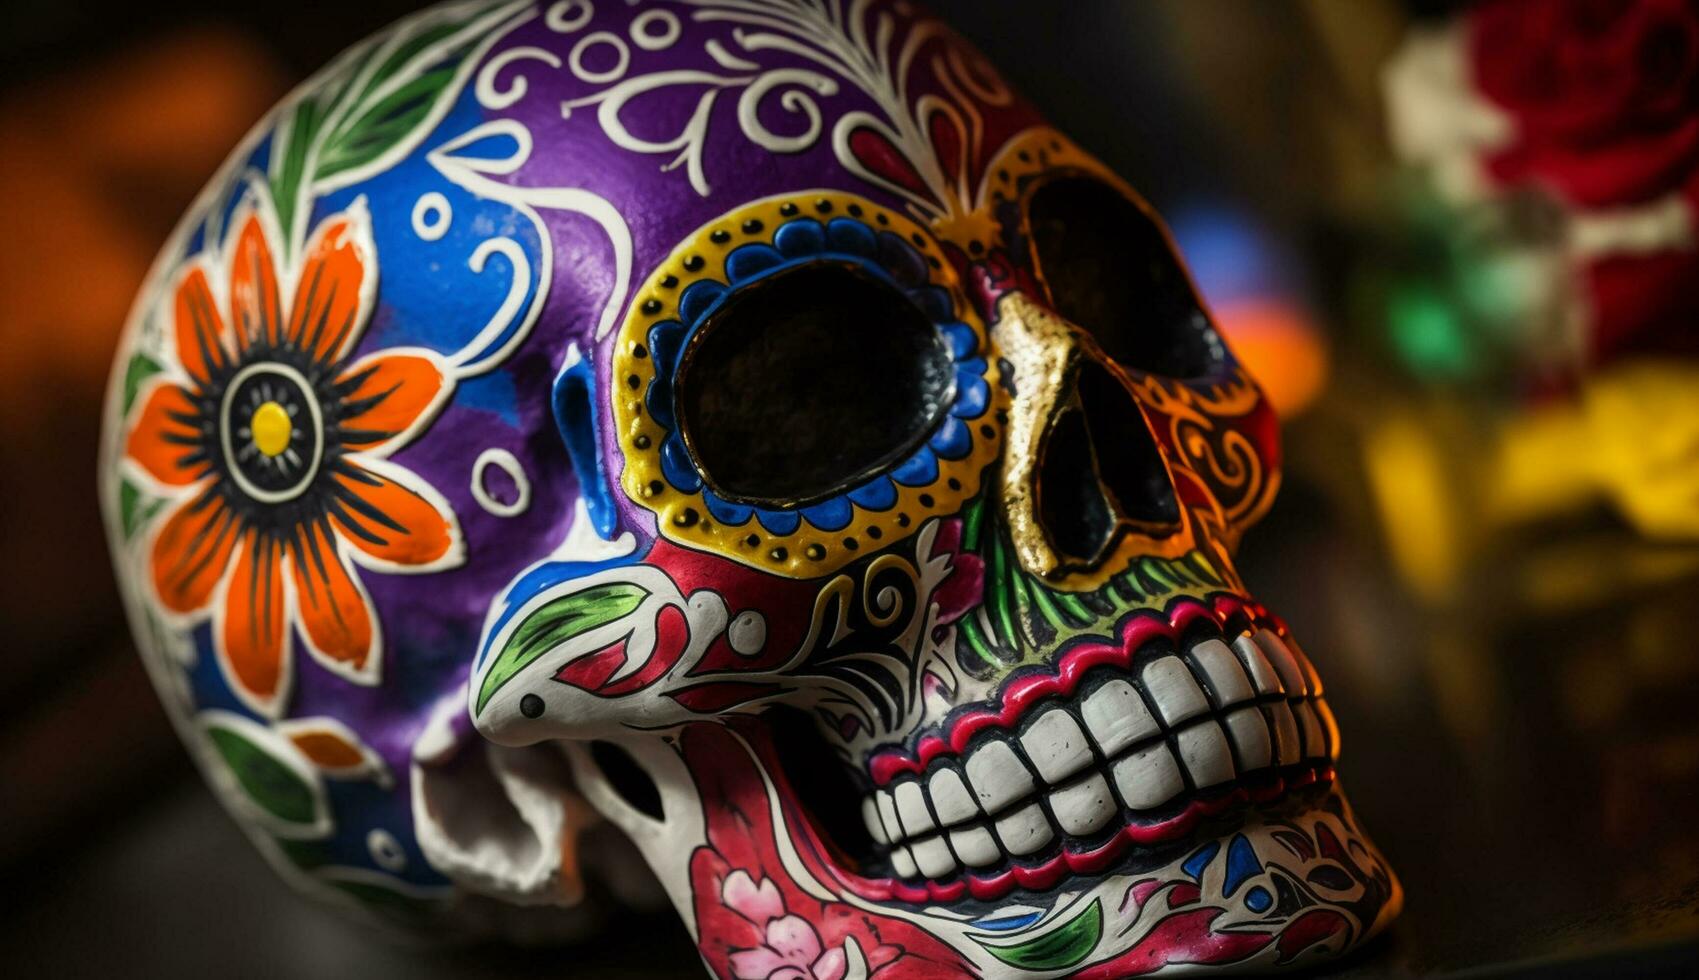 Multi colored human skull decoration for Halloween celebration generated by AI photo